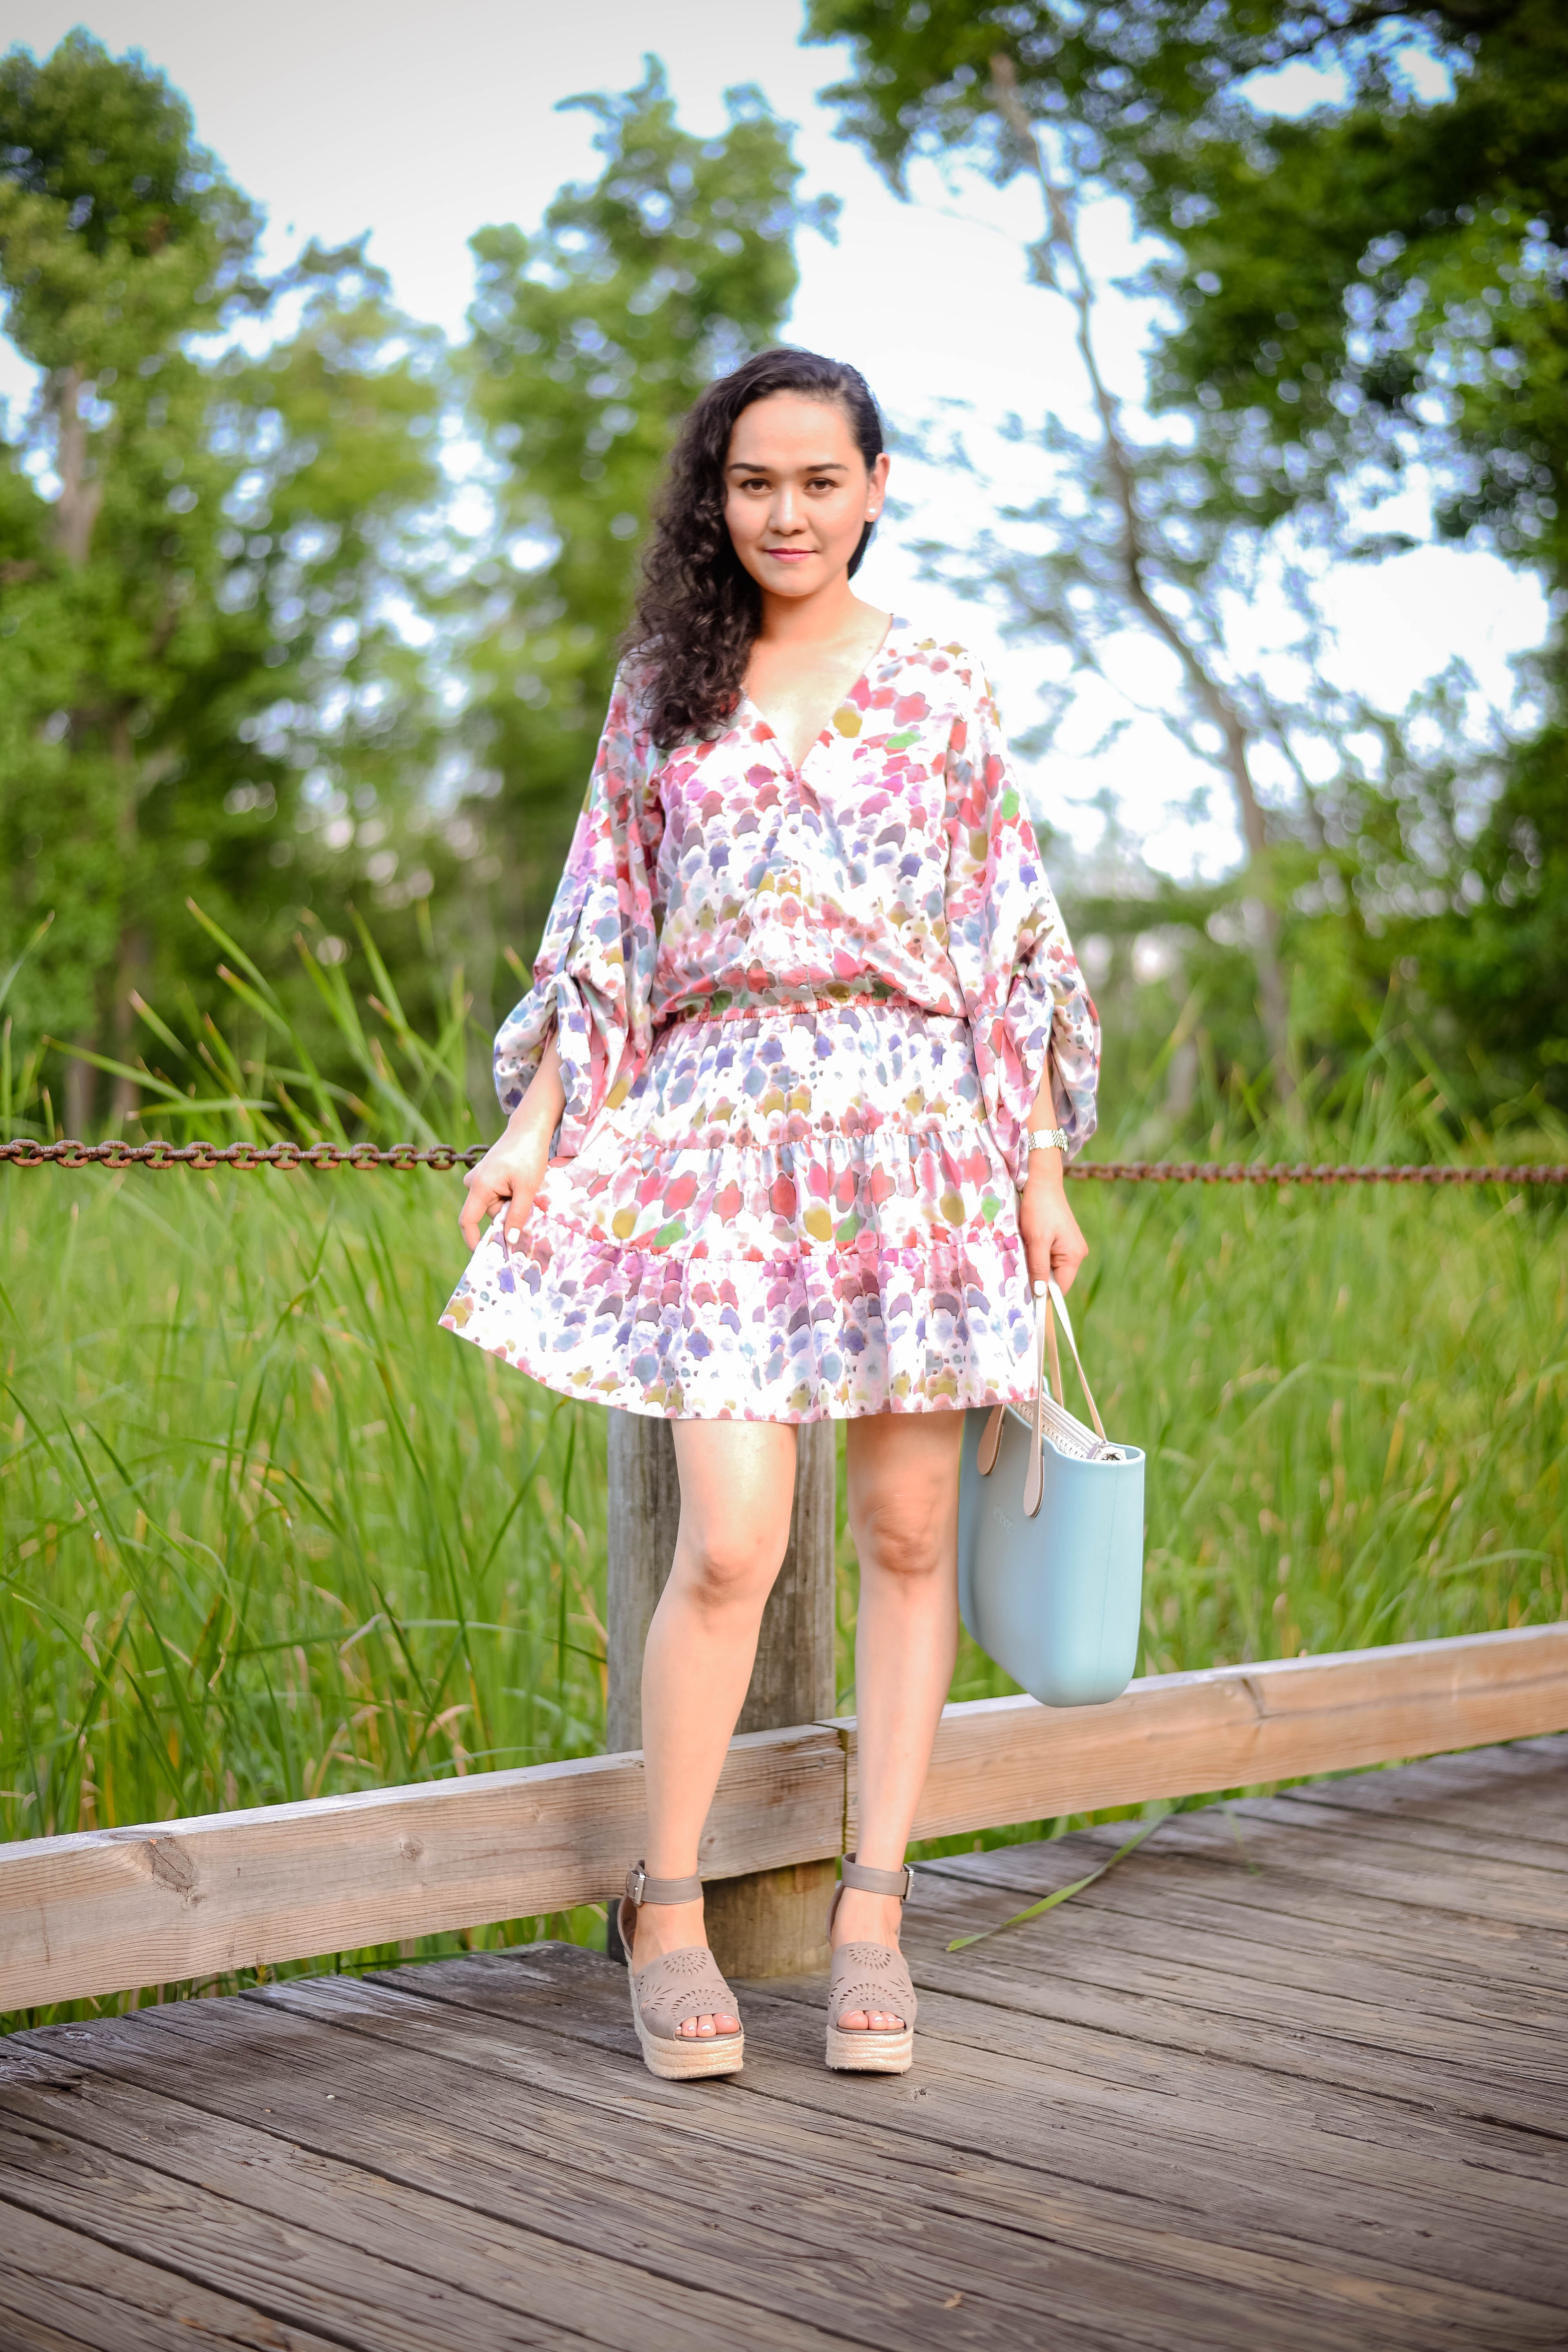 Summer Ready with My Alexis Damiana Crepe Dress